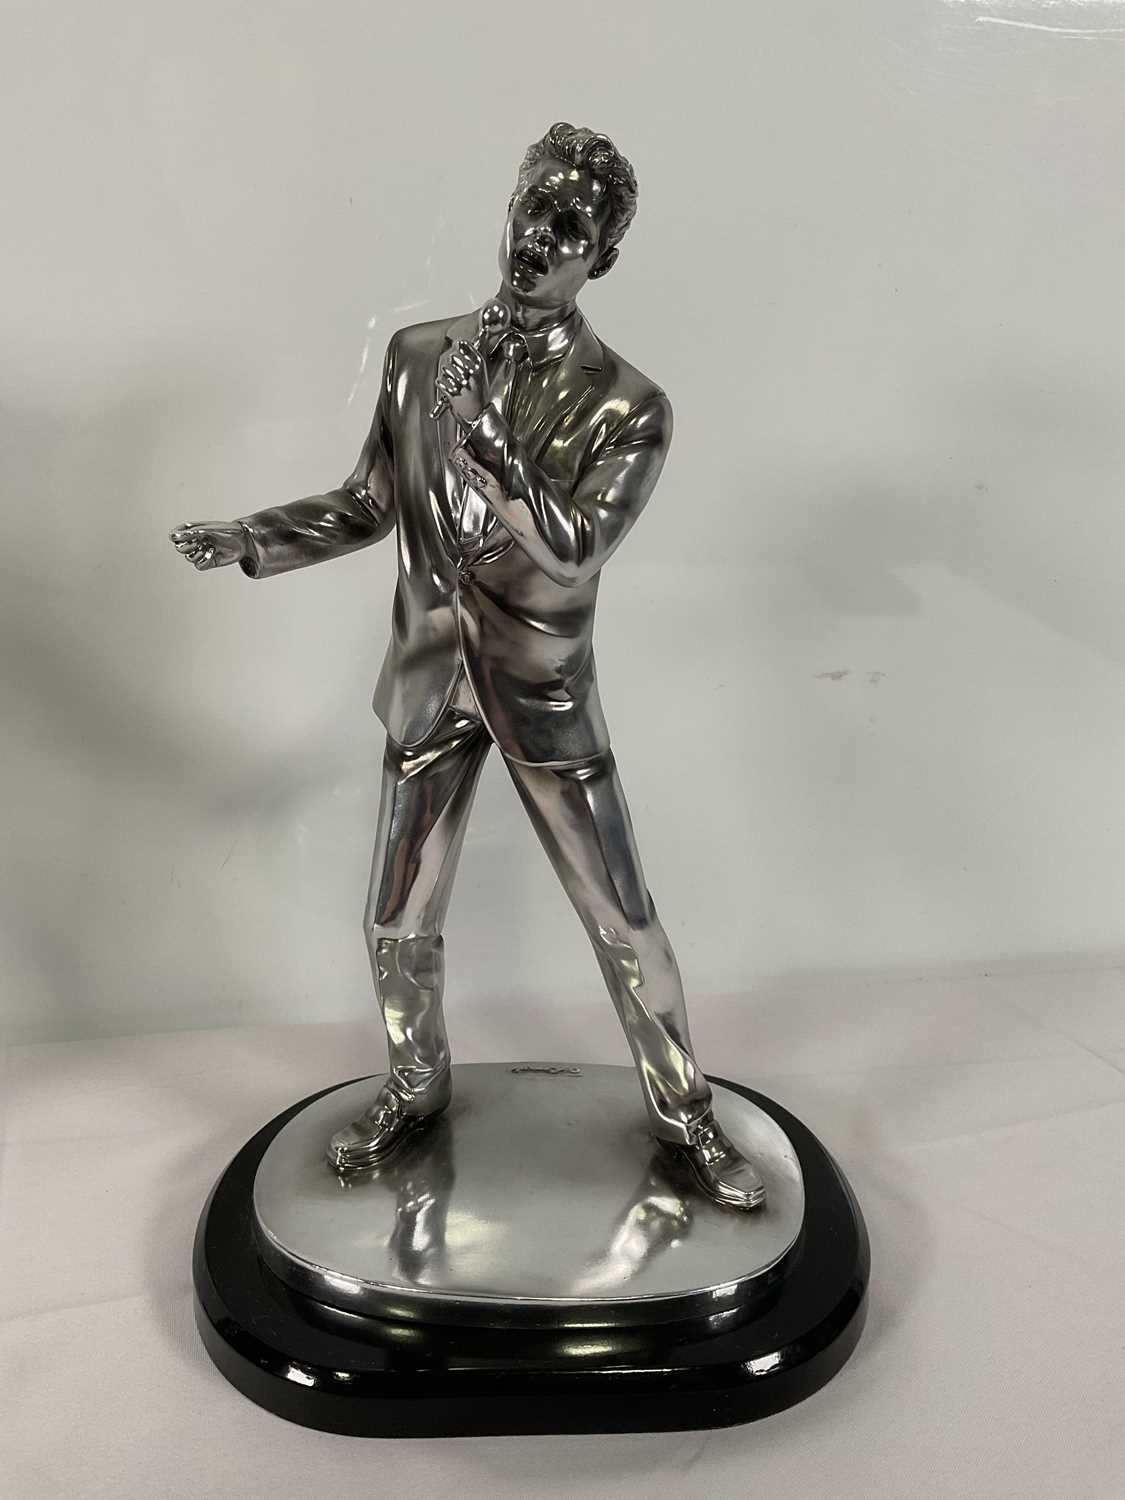 A pair of Silver Dreams by Leonardo (2005/6) statuettes of Cliff Richard and Hank Marvin in - Image 3 of 3